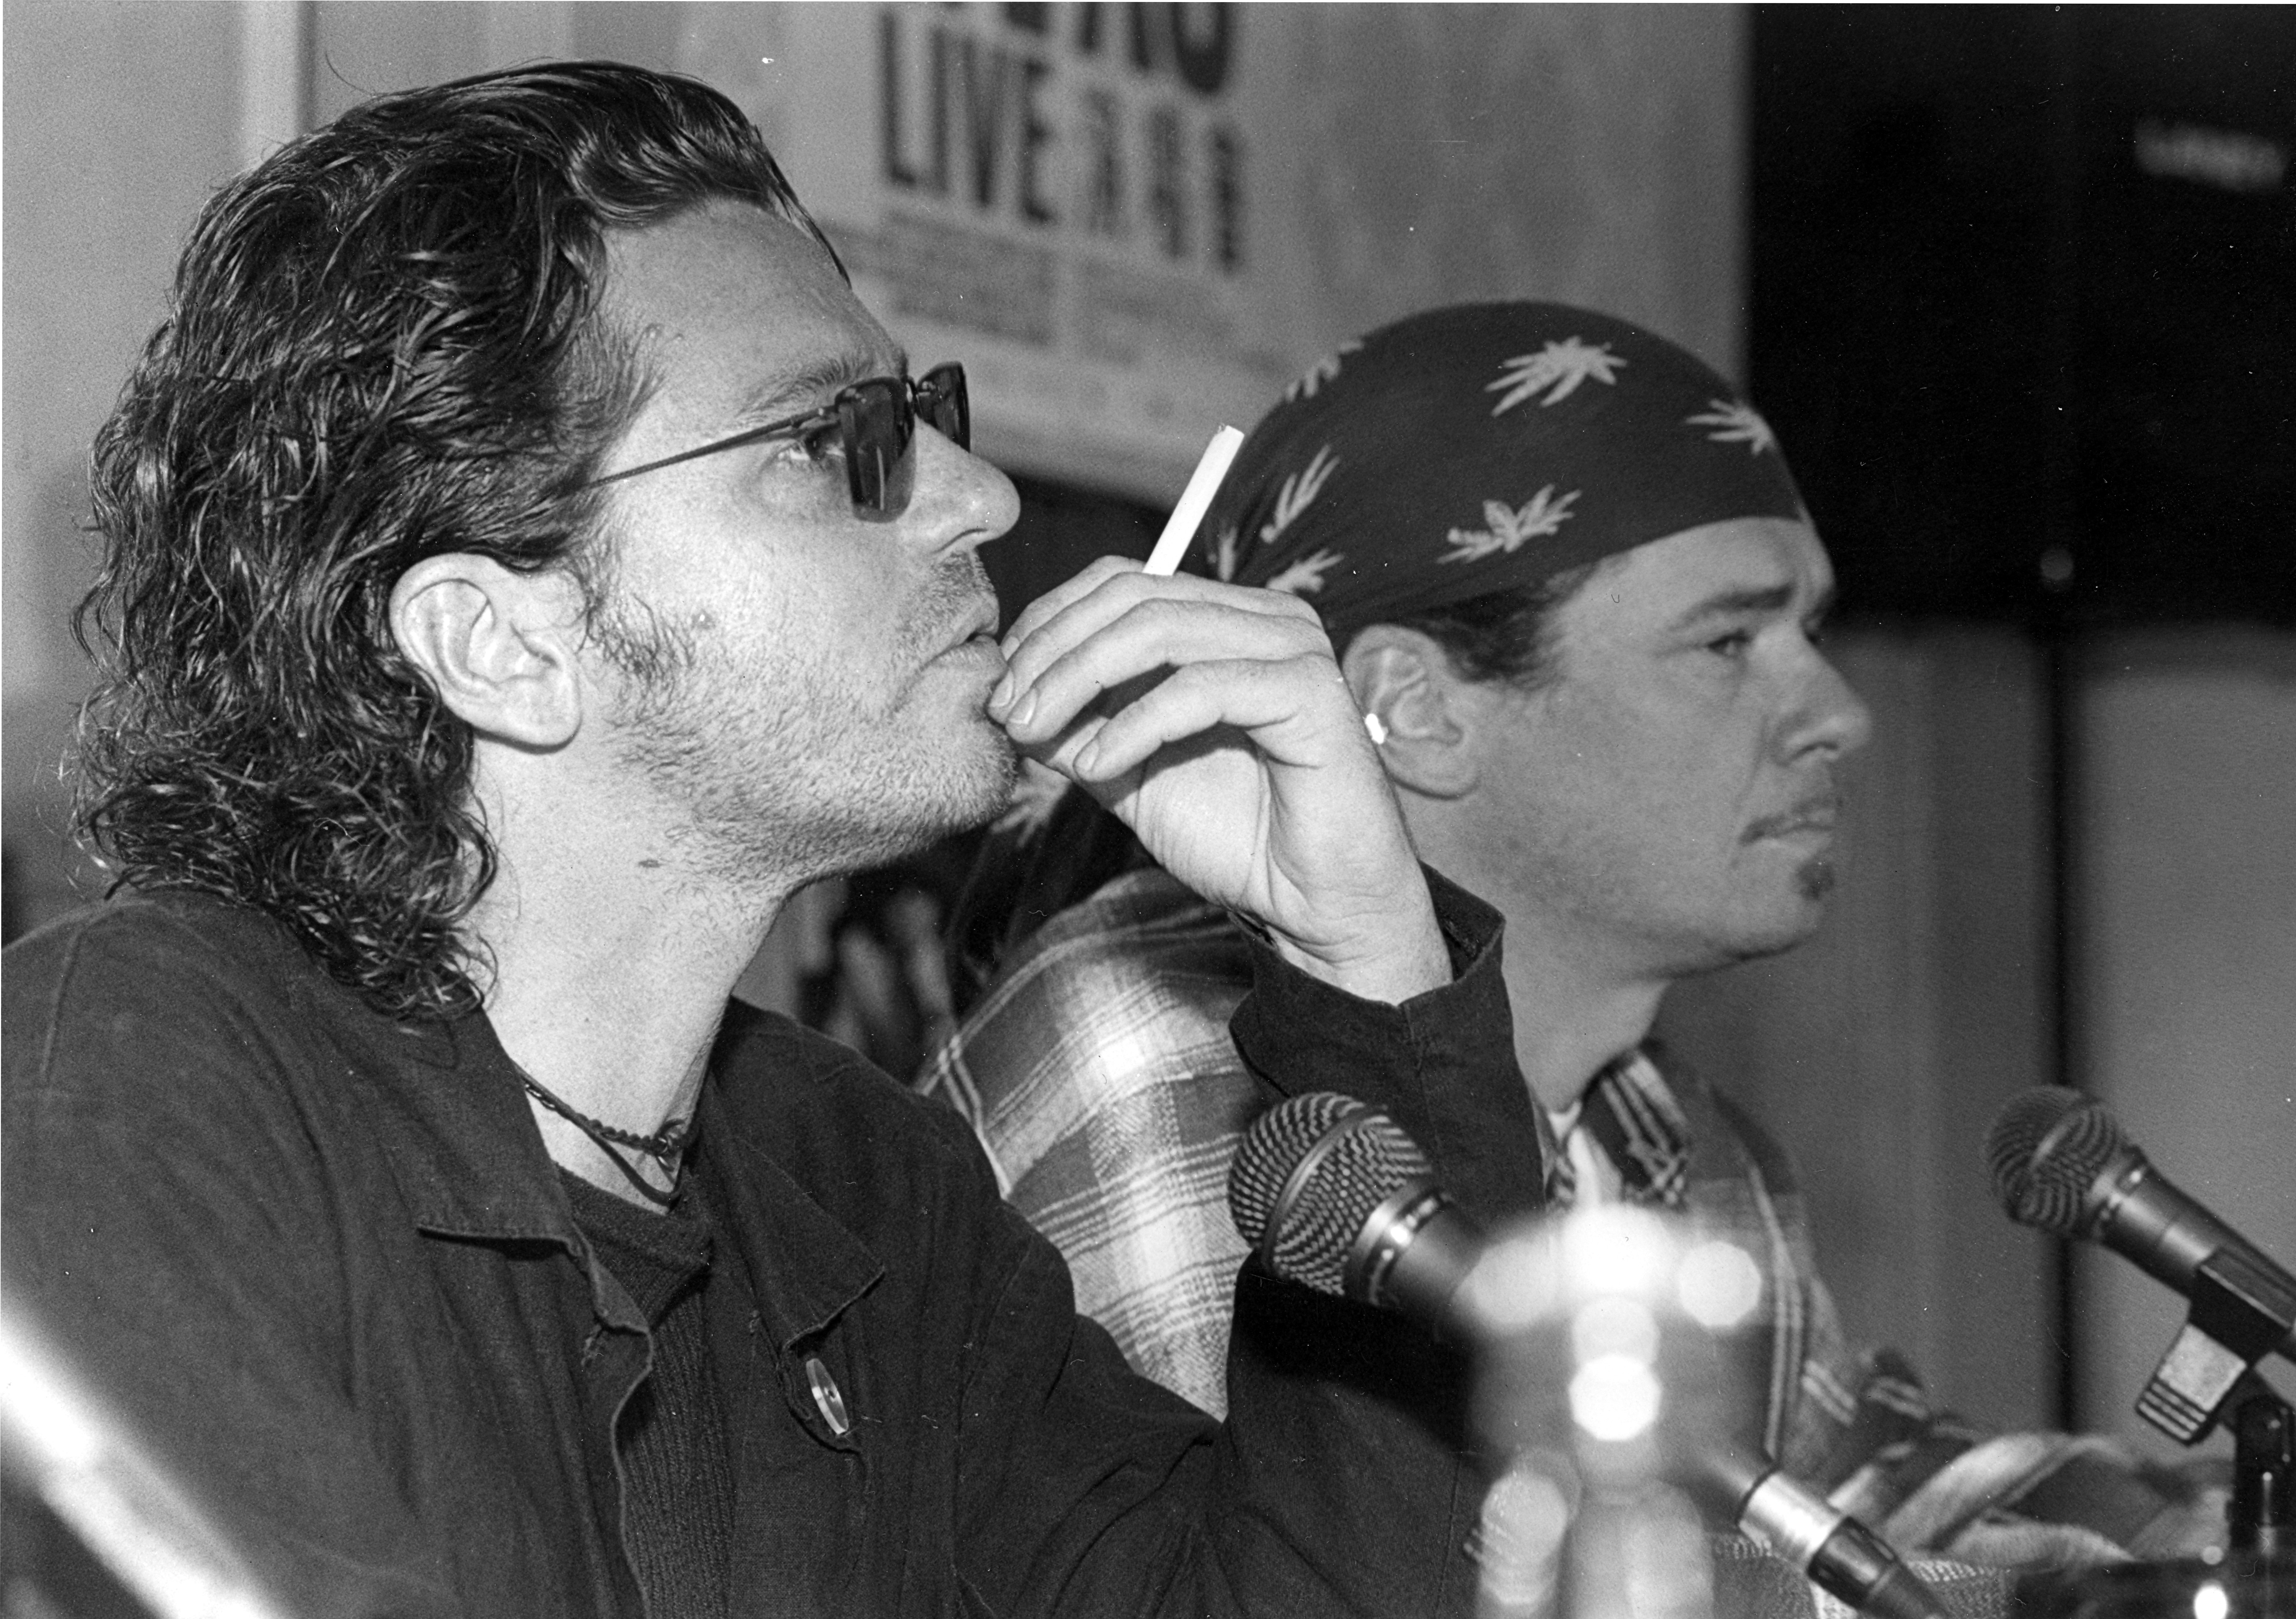 November 22 was the 20th anniversary of INXS singer’s death, and to commemorate this, we have an archive interview with the star before his first Hong Kong gigs. Three years later he was found dead in a Sydney hotel room